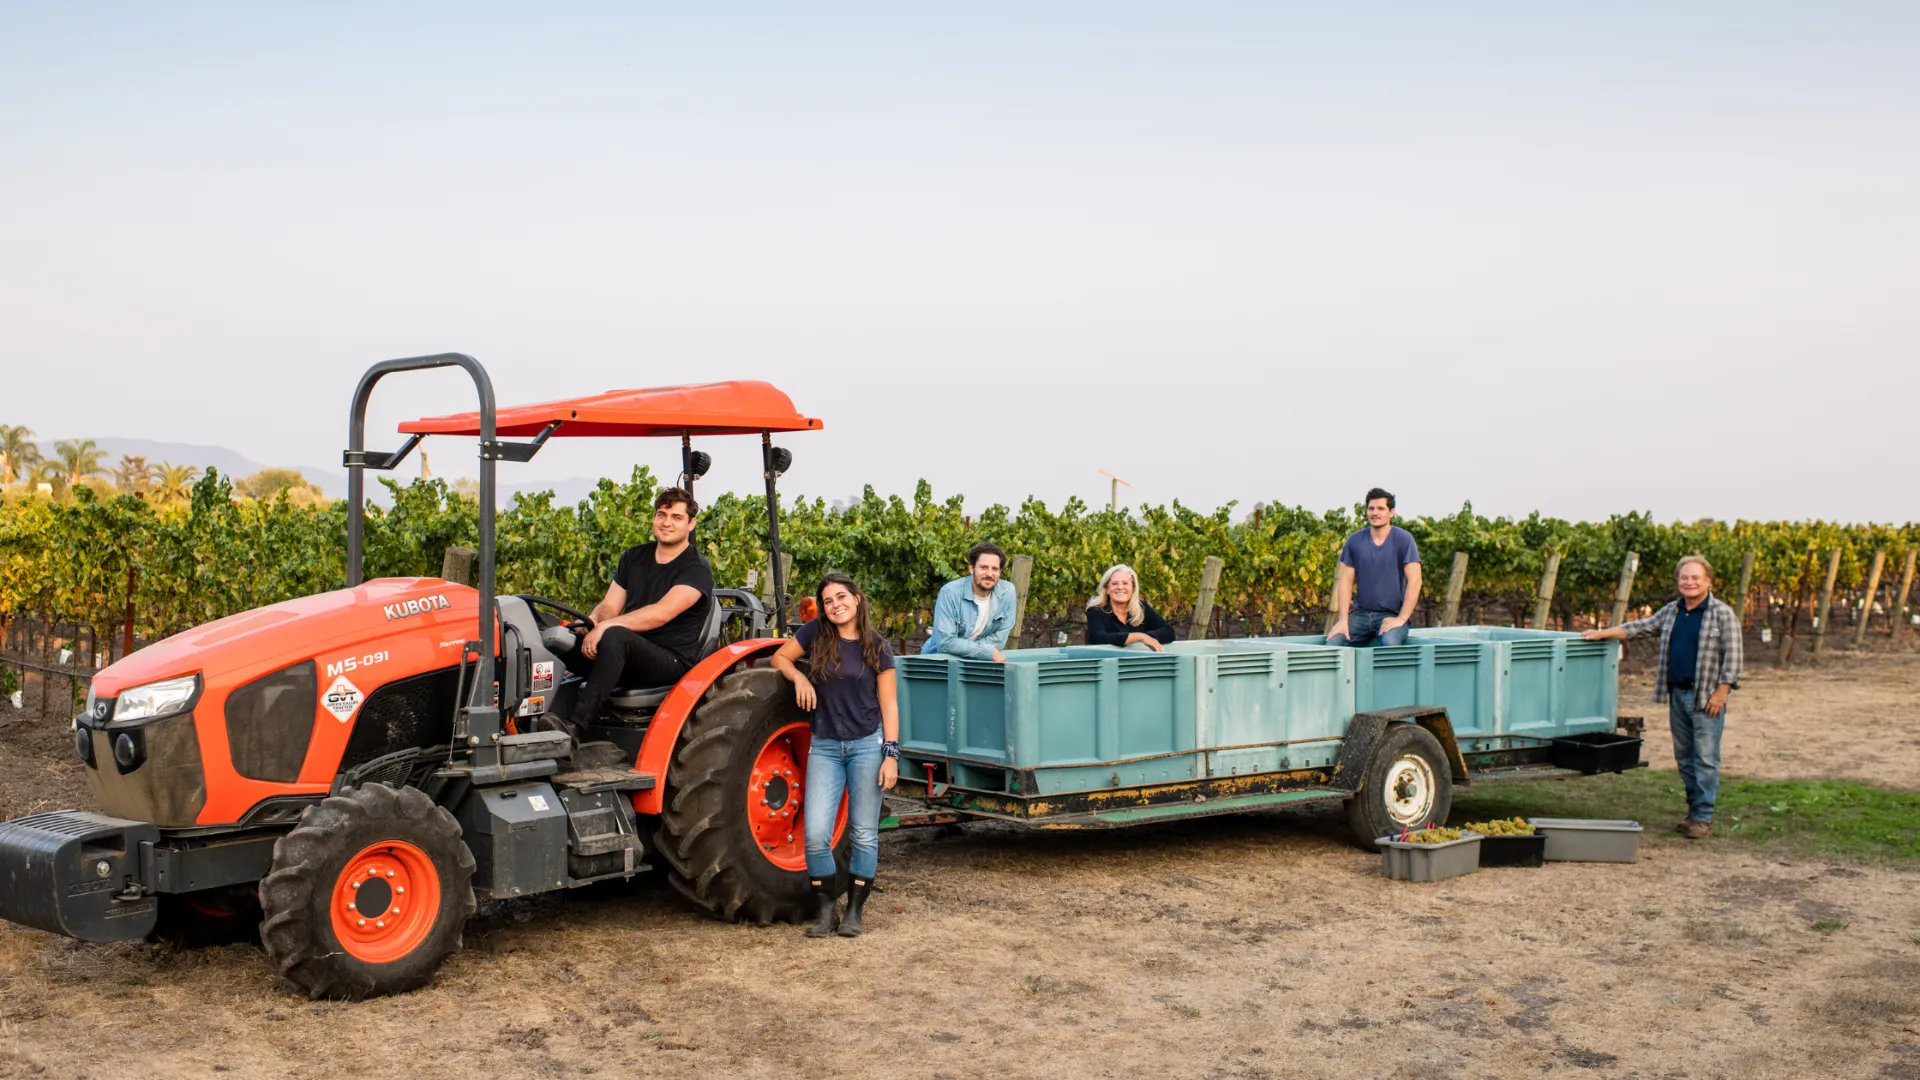 The Hanson family out in the vineyard harvesting